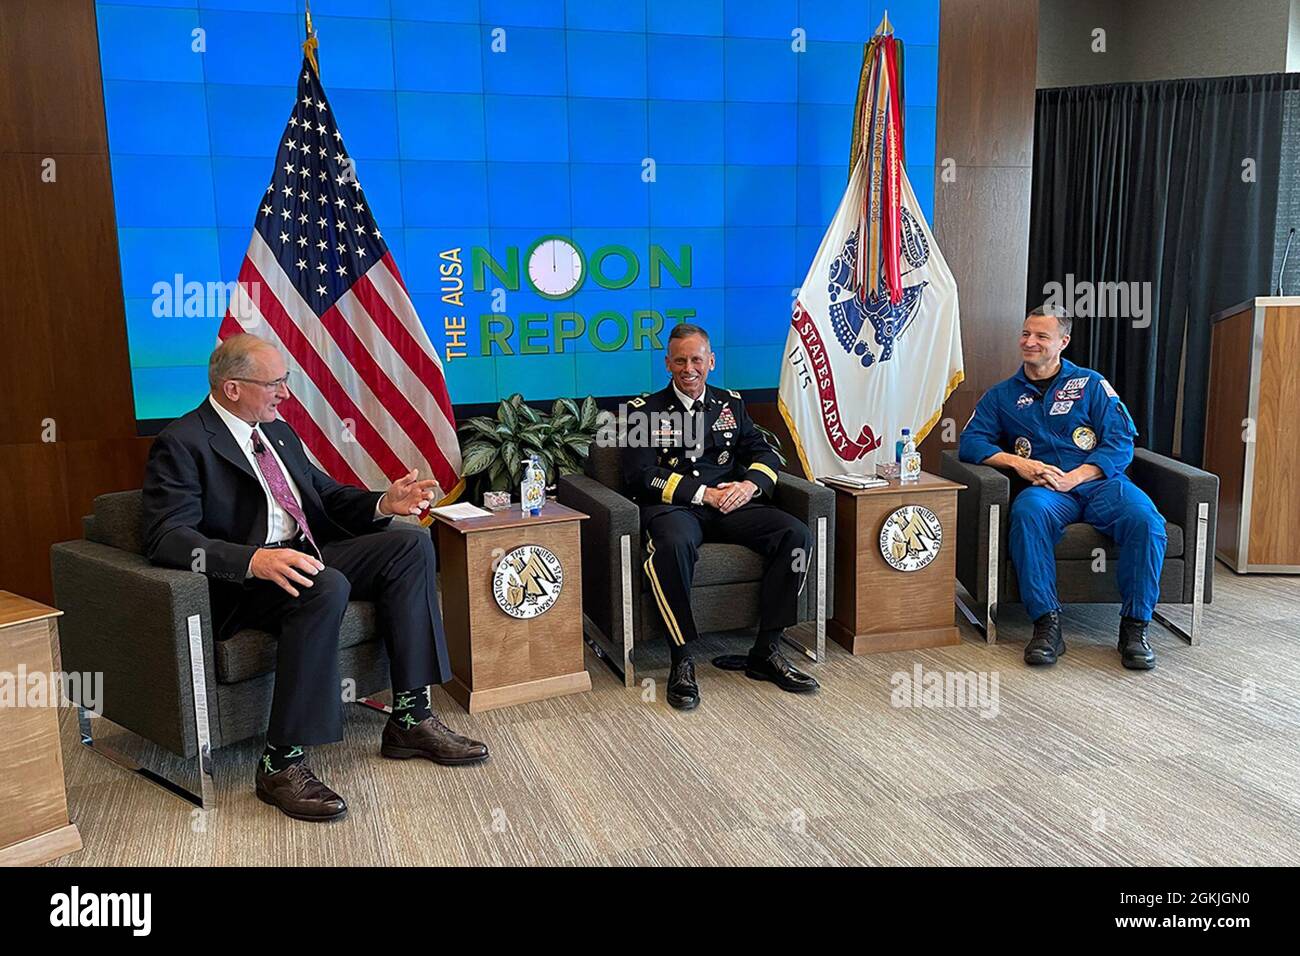 Retired Gen. Robert B. Brown, left, Association of the U.S. Army executive vice president, speaks with Lt. Gen. Daniel L. Karbler, commanding general, U.S. Army Space and Missile Defense Command, and Col. Andrew R. “Drew” Morgan, U.S. Army NASA Astronaut Detachment commander, at AUSA Noon Report, May 4, to discuss how Army space contributes to a multi-domain operations force. Stock Photo